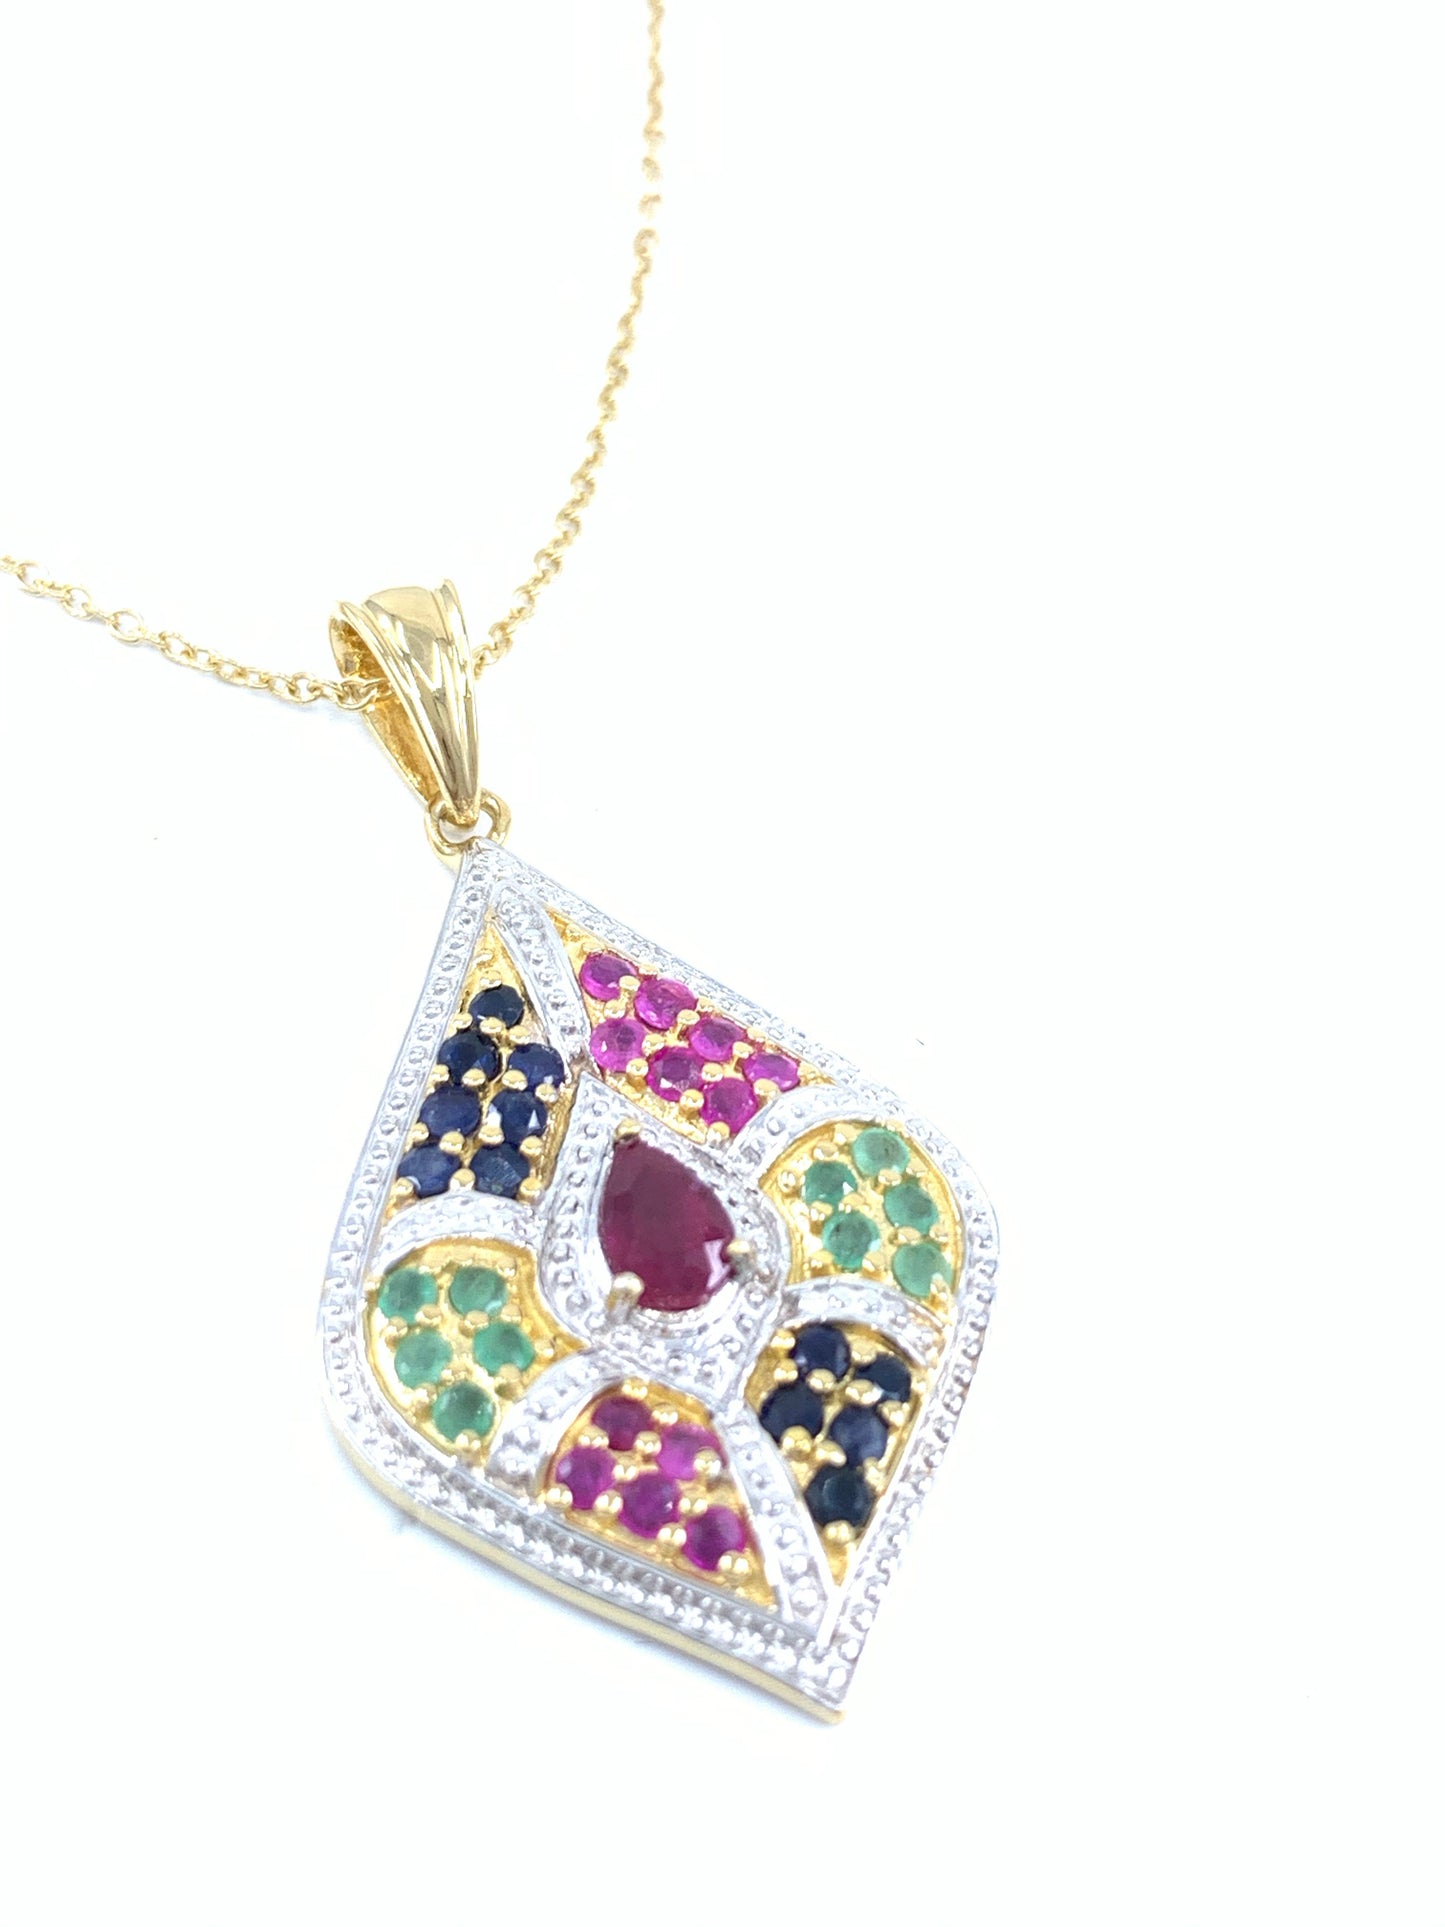 Fascinating 14k Gold Emerald Ruby and Sapphire Pendant